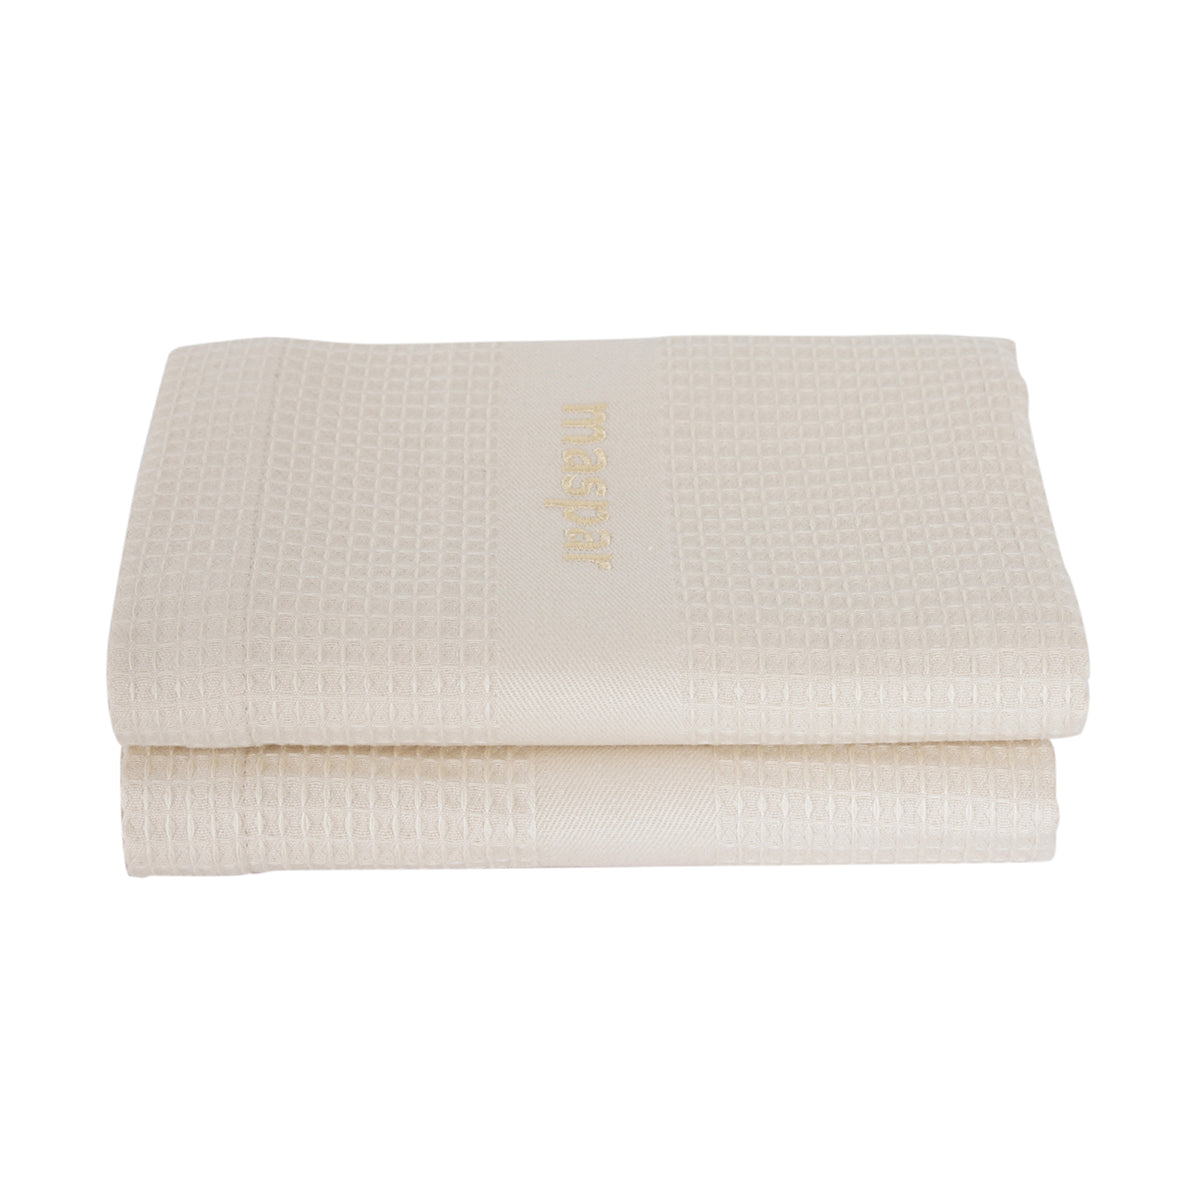 Catalina Waffle Antimicrobial Antifungal Super Absorbent Quick Dry Gym/Travel Cream Towel Set